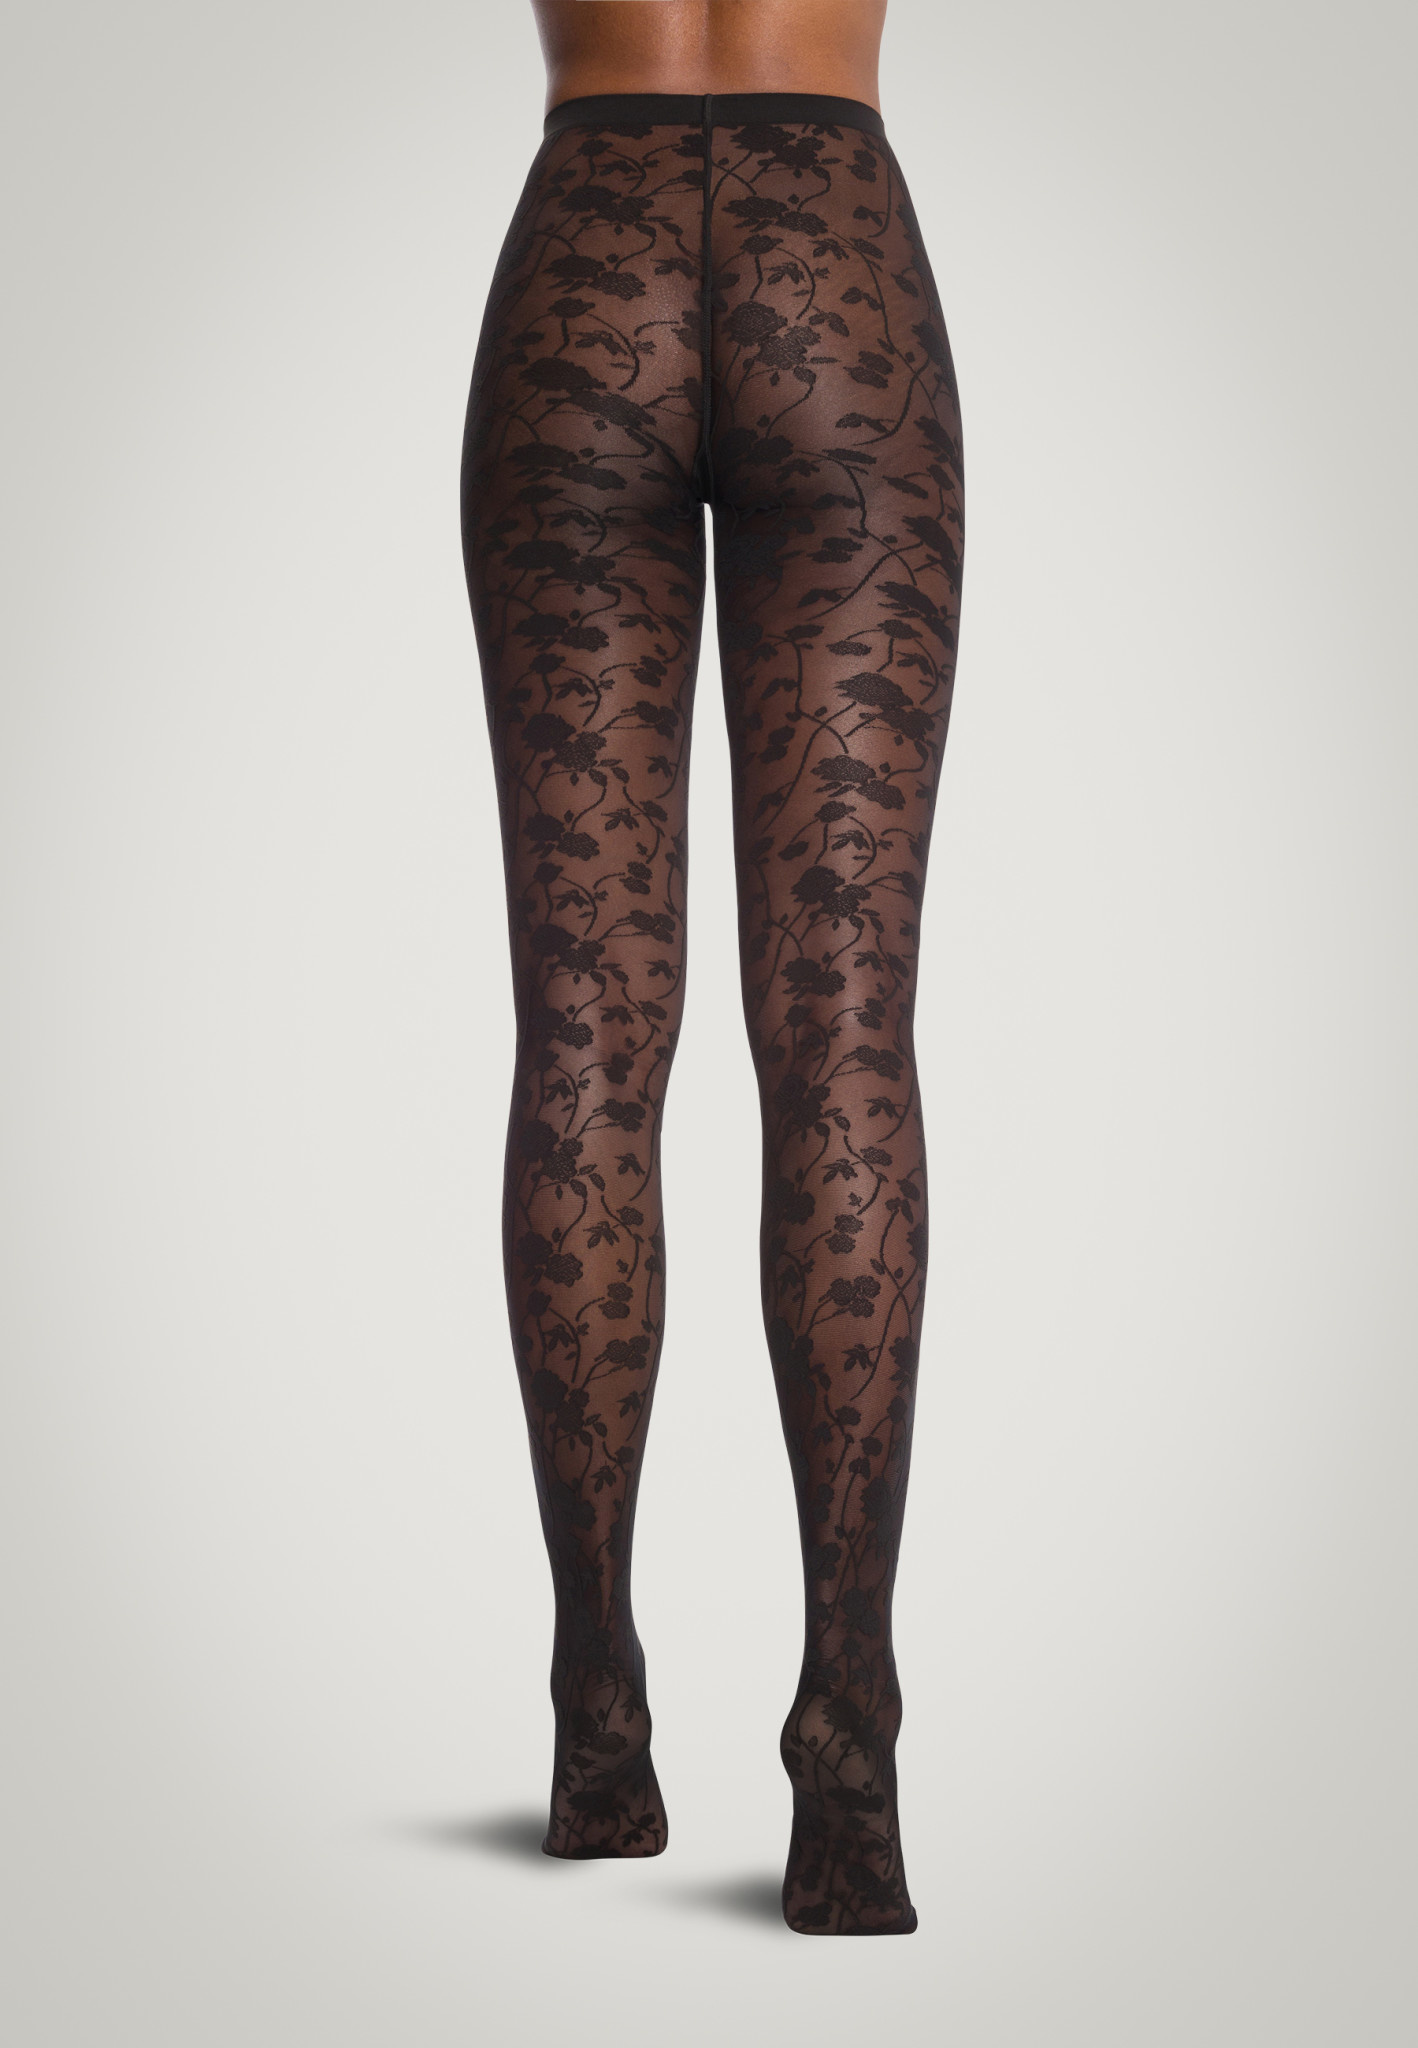 WOLFORD 14920 Roses Tights